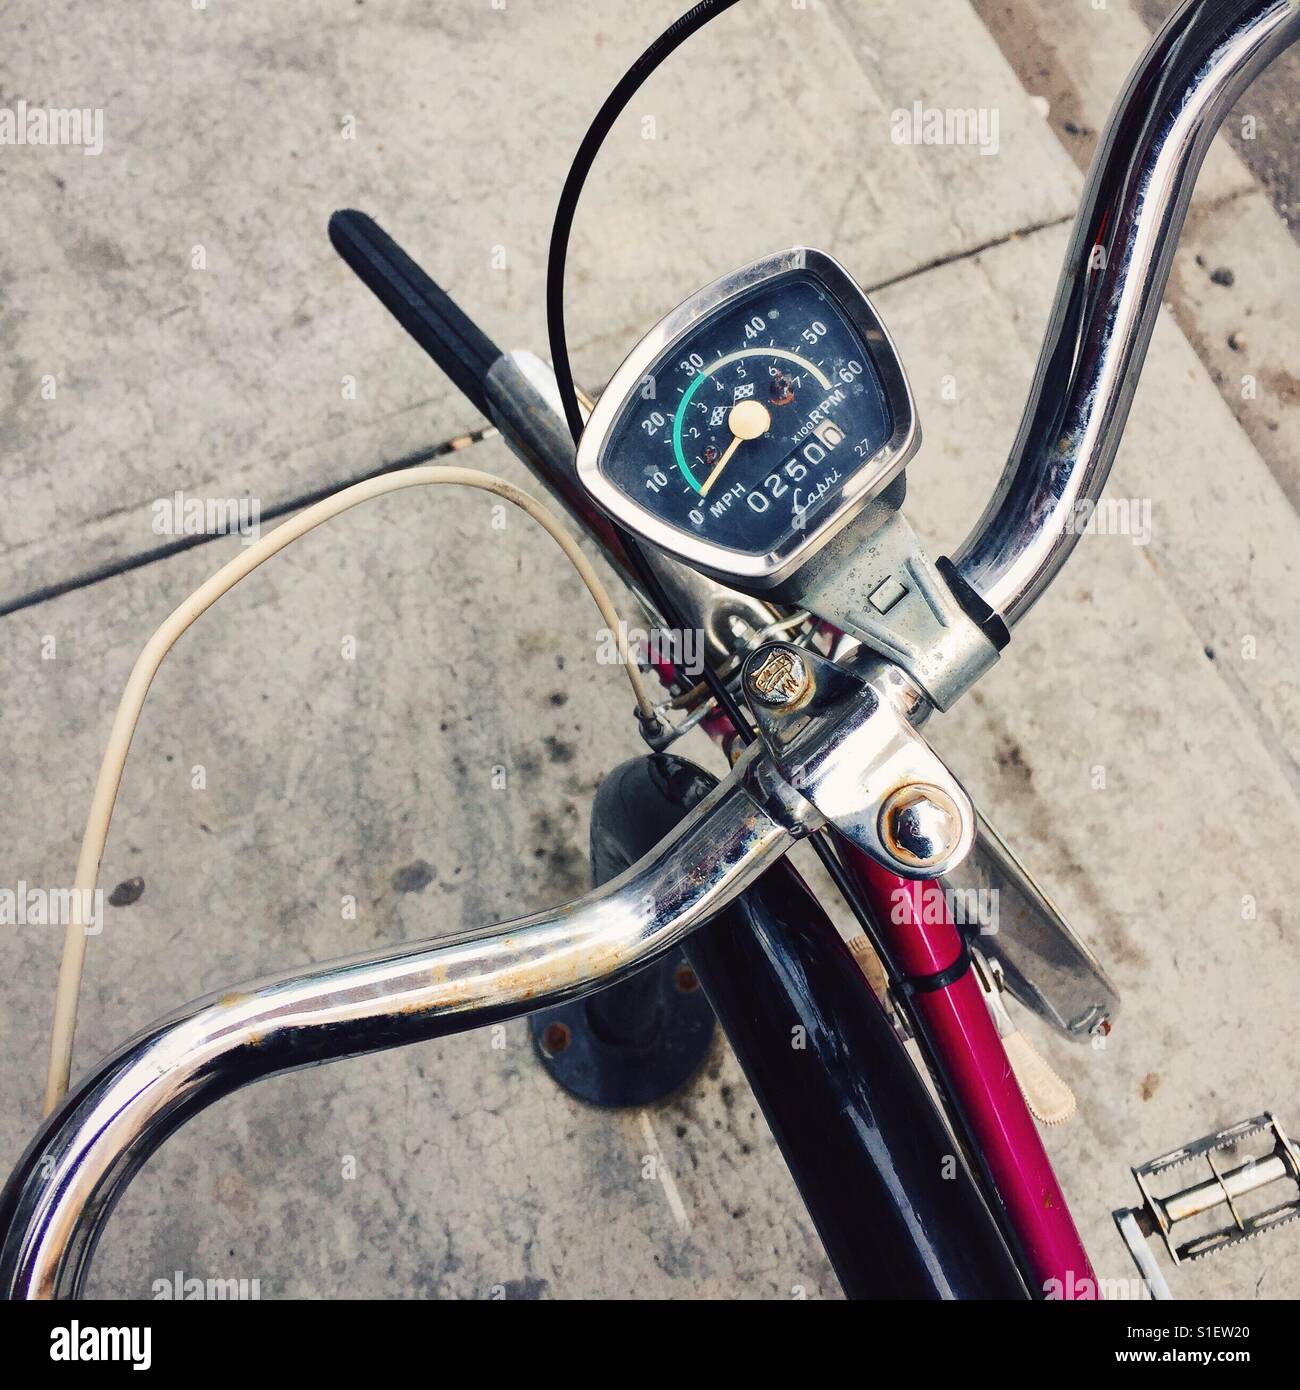 An old bicycle with a speedometer Stock Photo Alamy